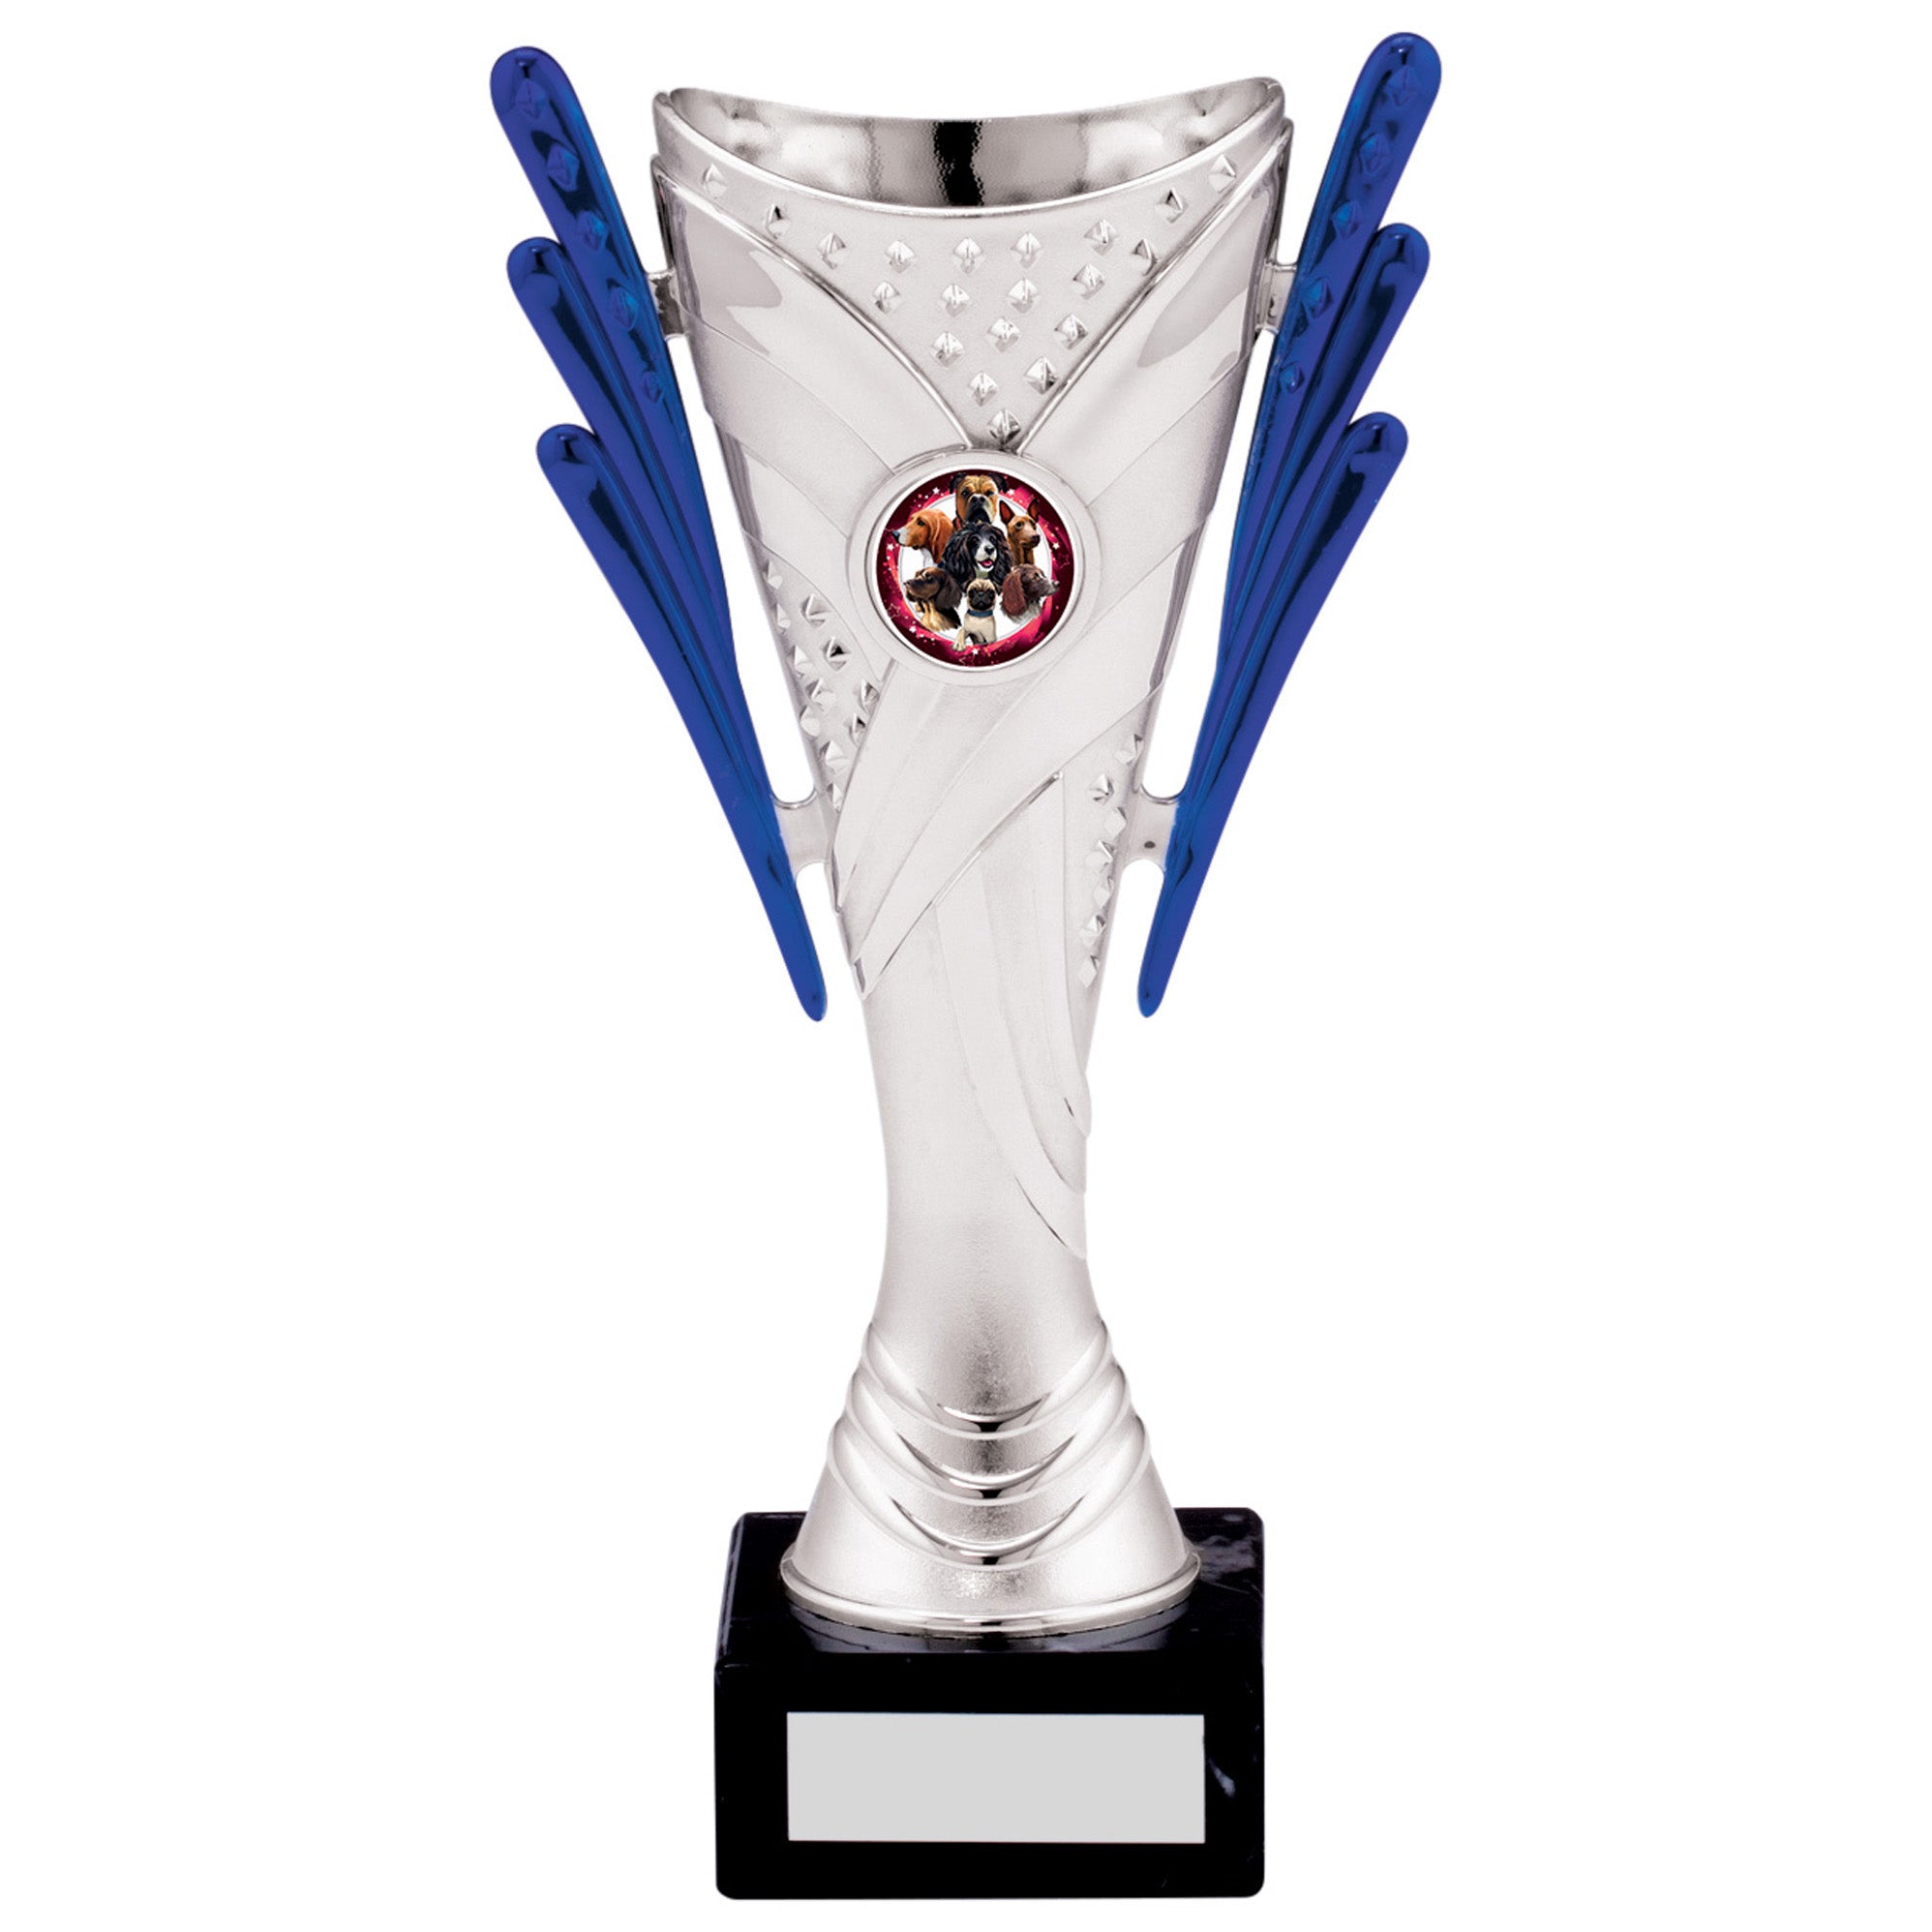 Silver and Blue Plastic Trophy Cup on Black Marble Base